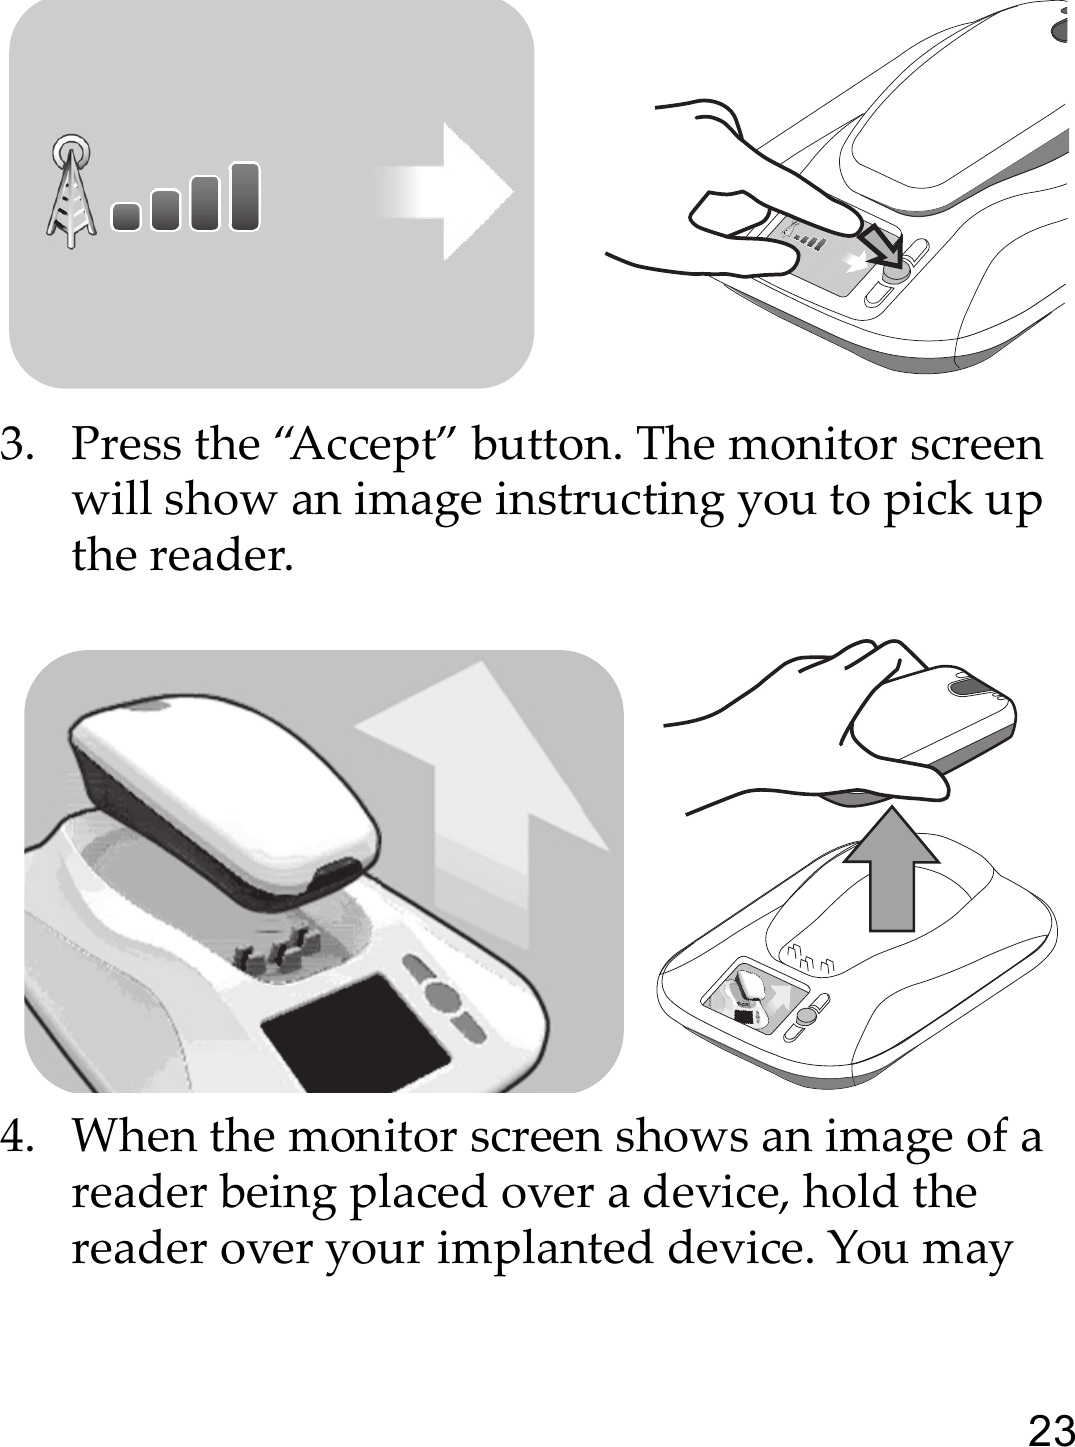 233. Press the “Accept” button. The monitor screen will show an image instructing you to pick up the reader.4. When the monitor screen shows an image of a reader being placed over a device, hold the reader over your implanted device. You may 